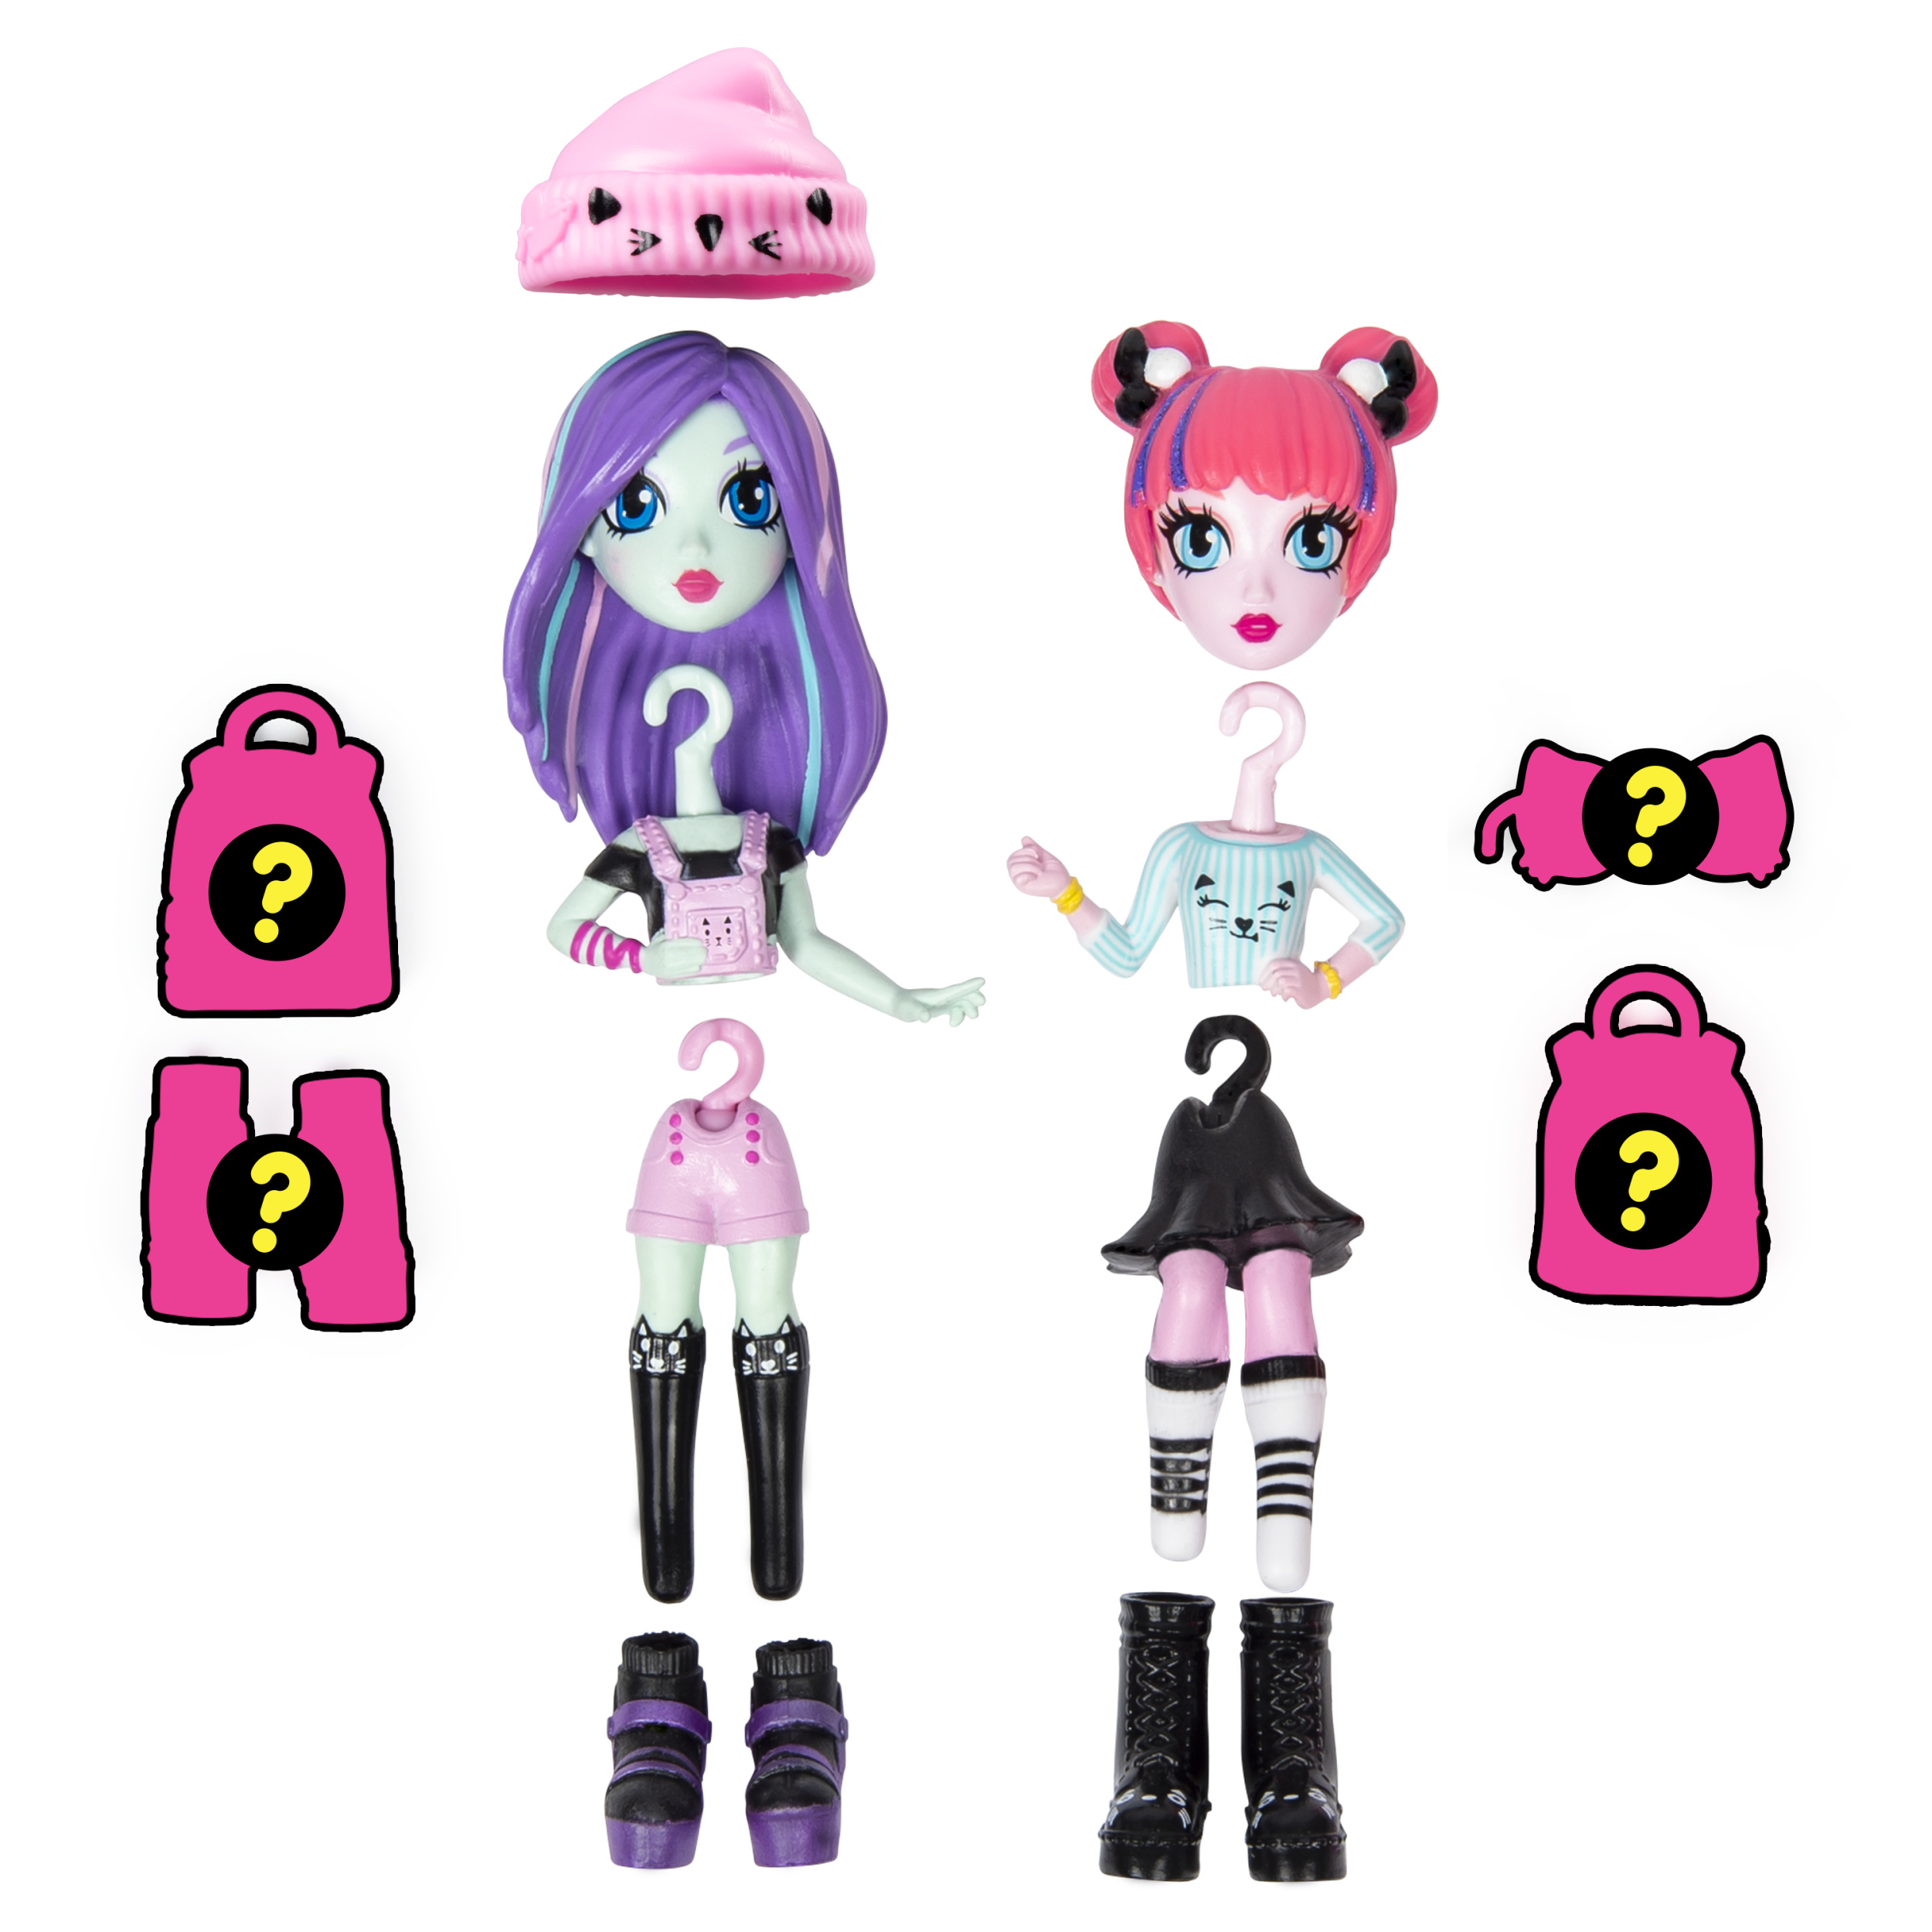 Off The Hook Style BFFs Brooklyn & Alexis Fashion Doll Playset, 6 Pieces Included - image 2 of 8